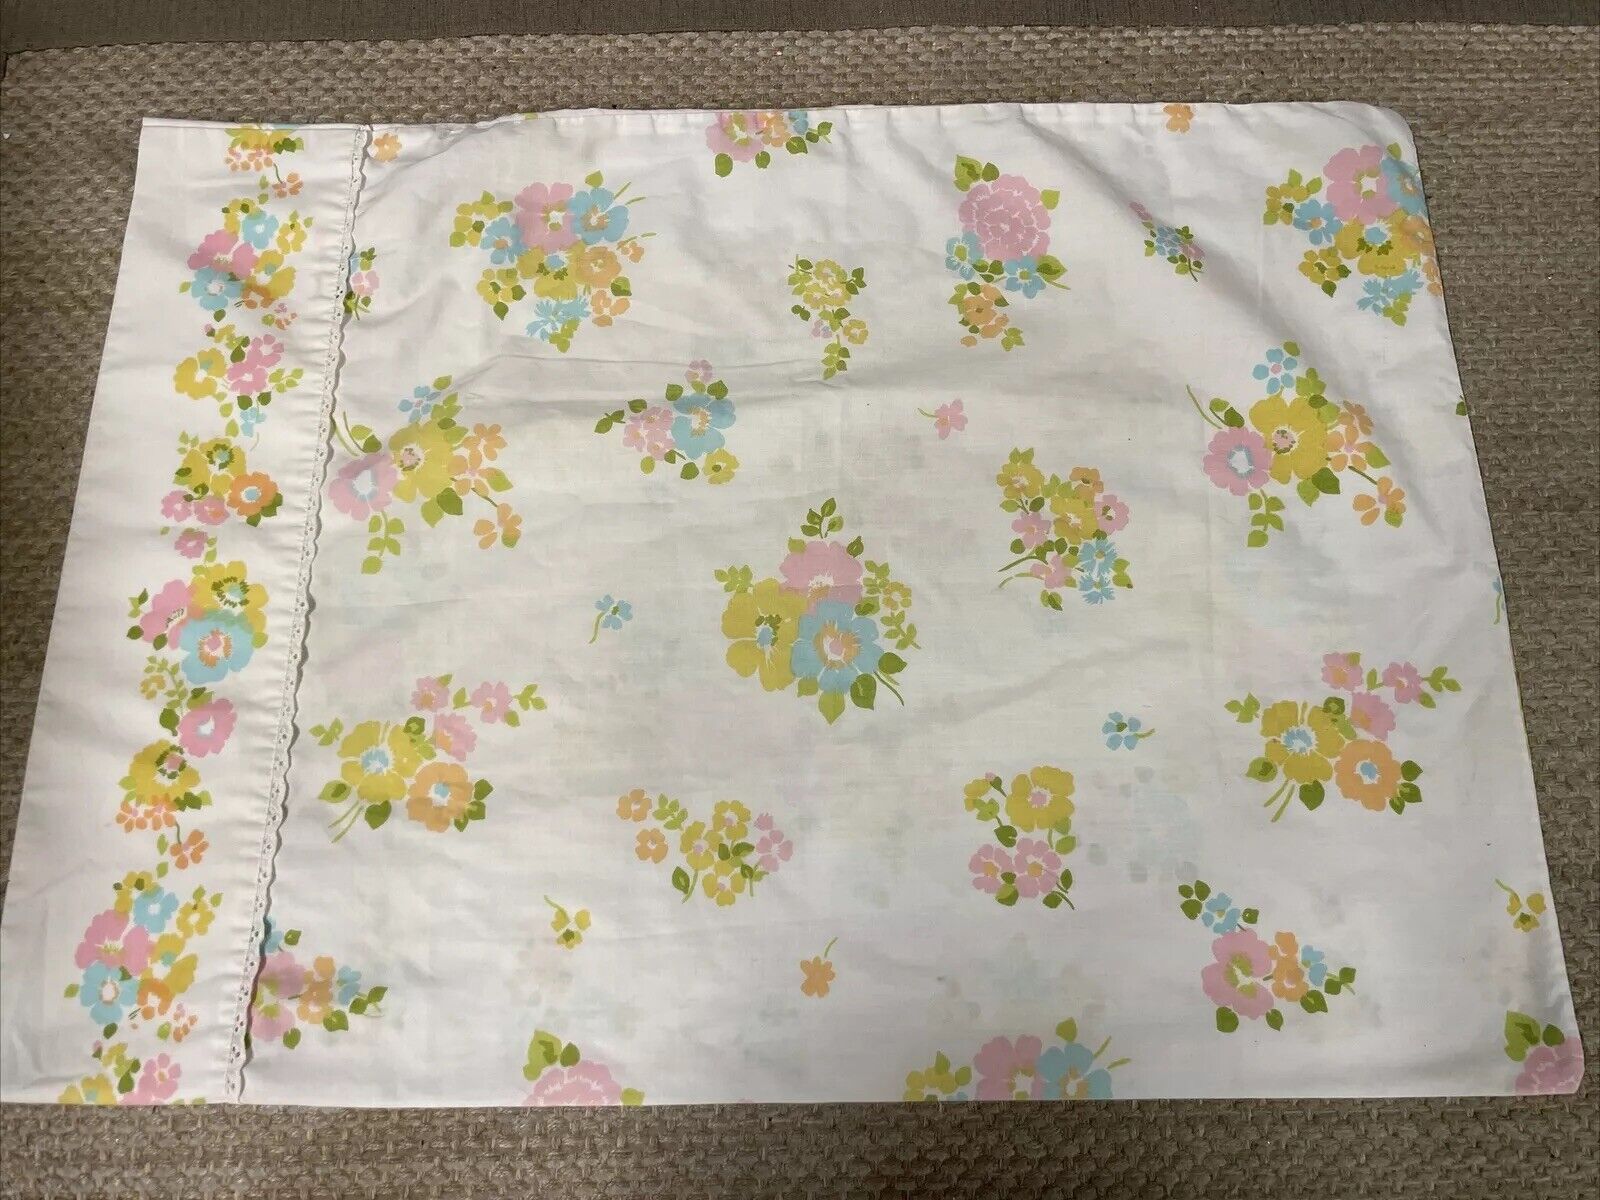 VTG 70s Fashion Manor Floral JCPenney Percale Penn Prest Standard Pillowcase